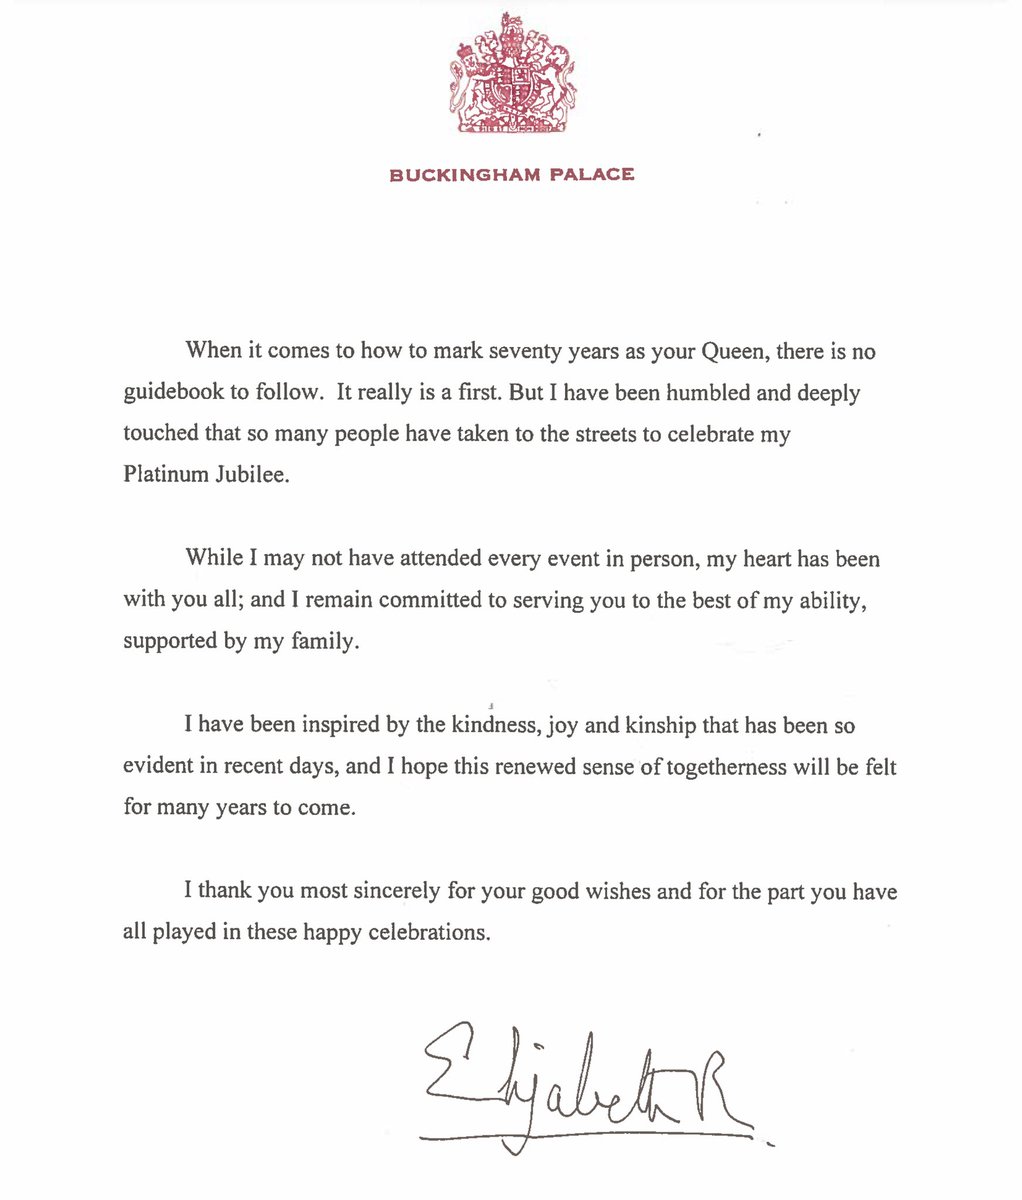 “I have been humbled and deeply touched that so many people have taken to the streets to celebrate my Platinum Jubilee.” As the #PlatinumJubilee weekend draws to a close, Her Majesty has sent a thank you message to all those who have marked her 70 years as Queen.